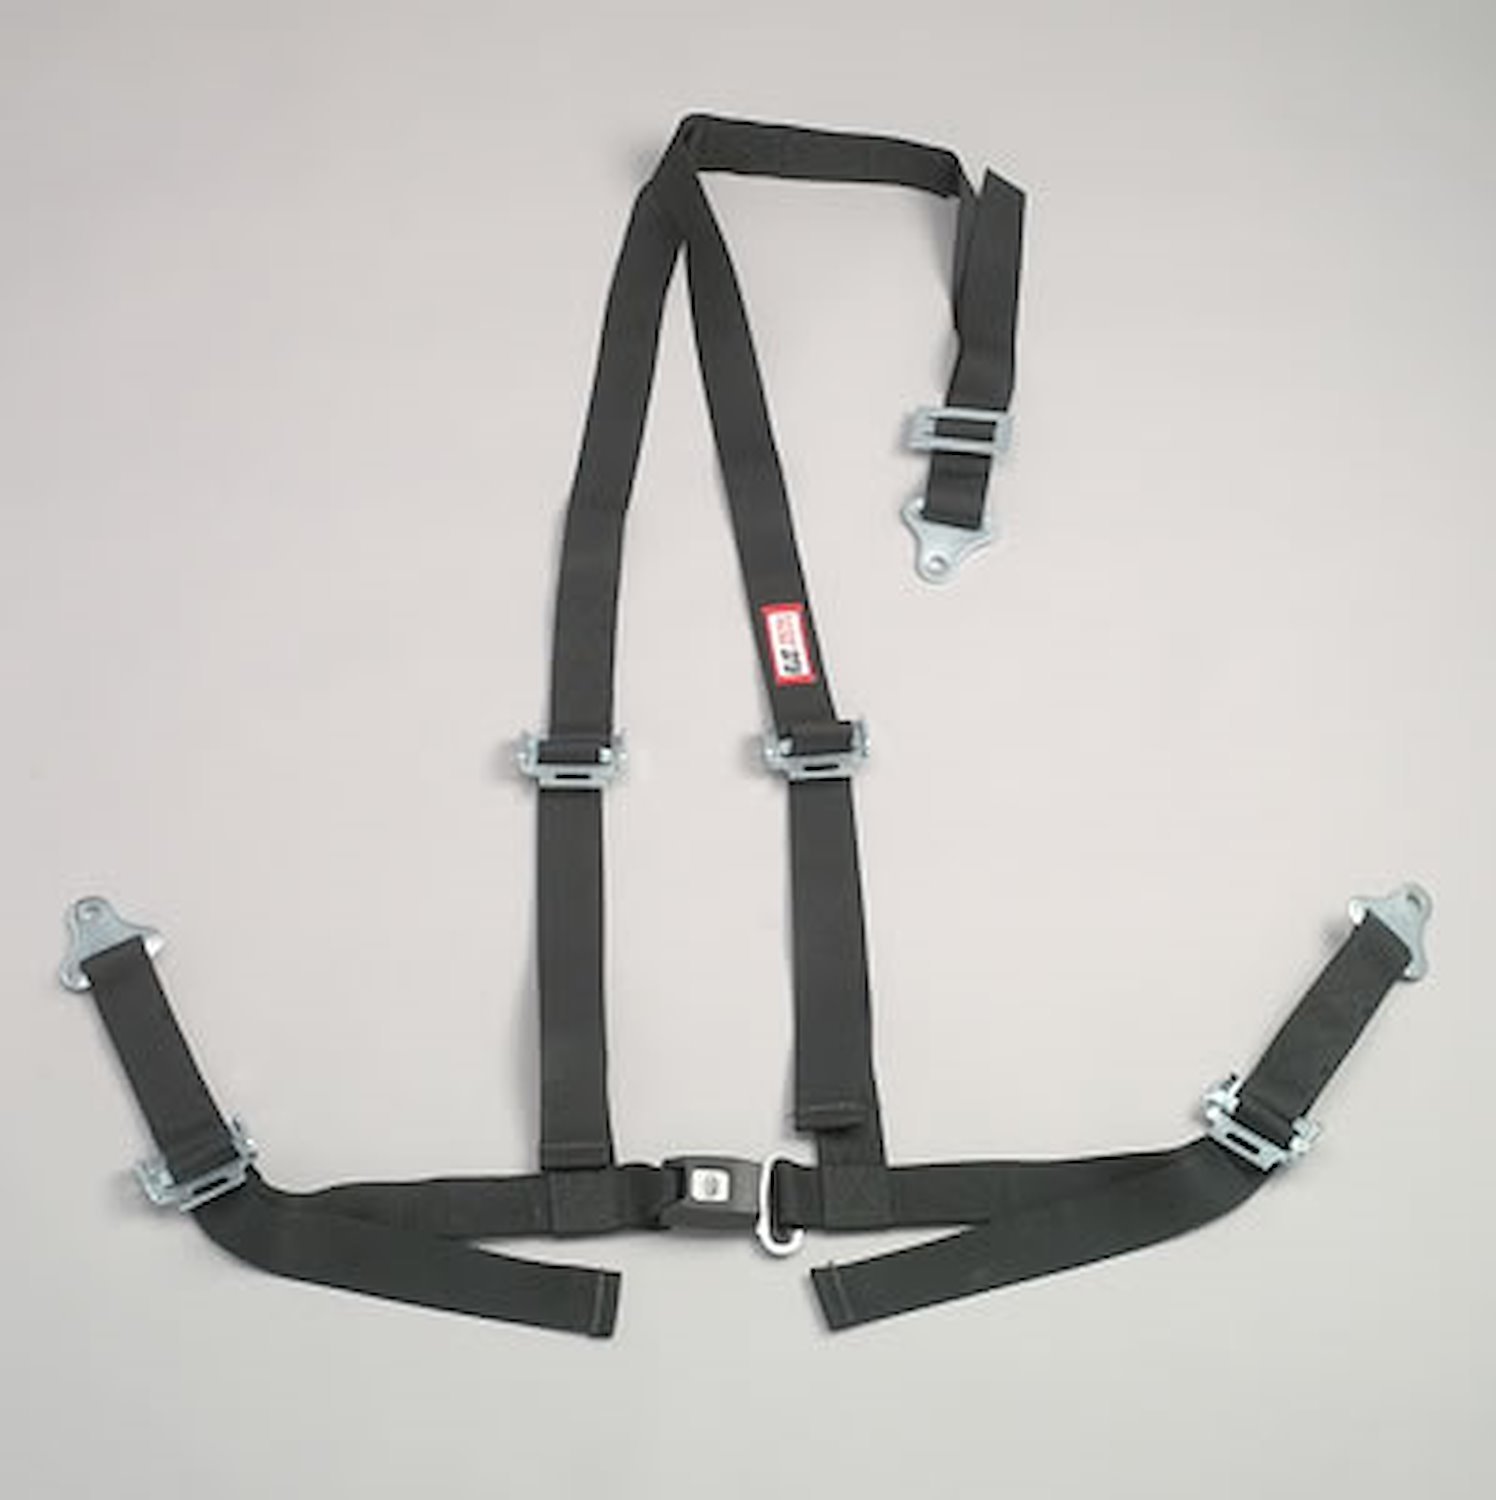 NON-SFI B&T HARNESS 2 PULL UP Lap Belt SNAP 2 S. H. Individual ROLL BAR Mount WRAP/SNAP RED